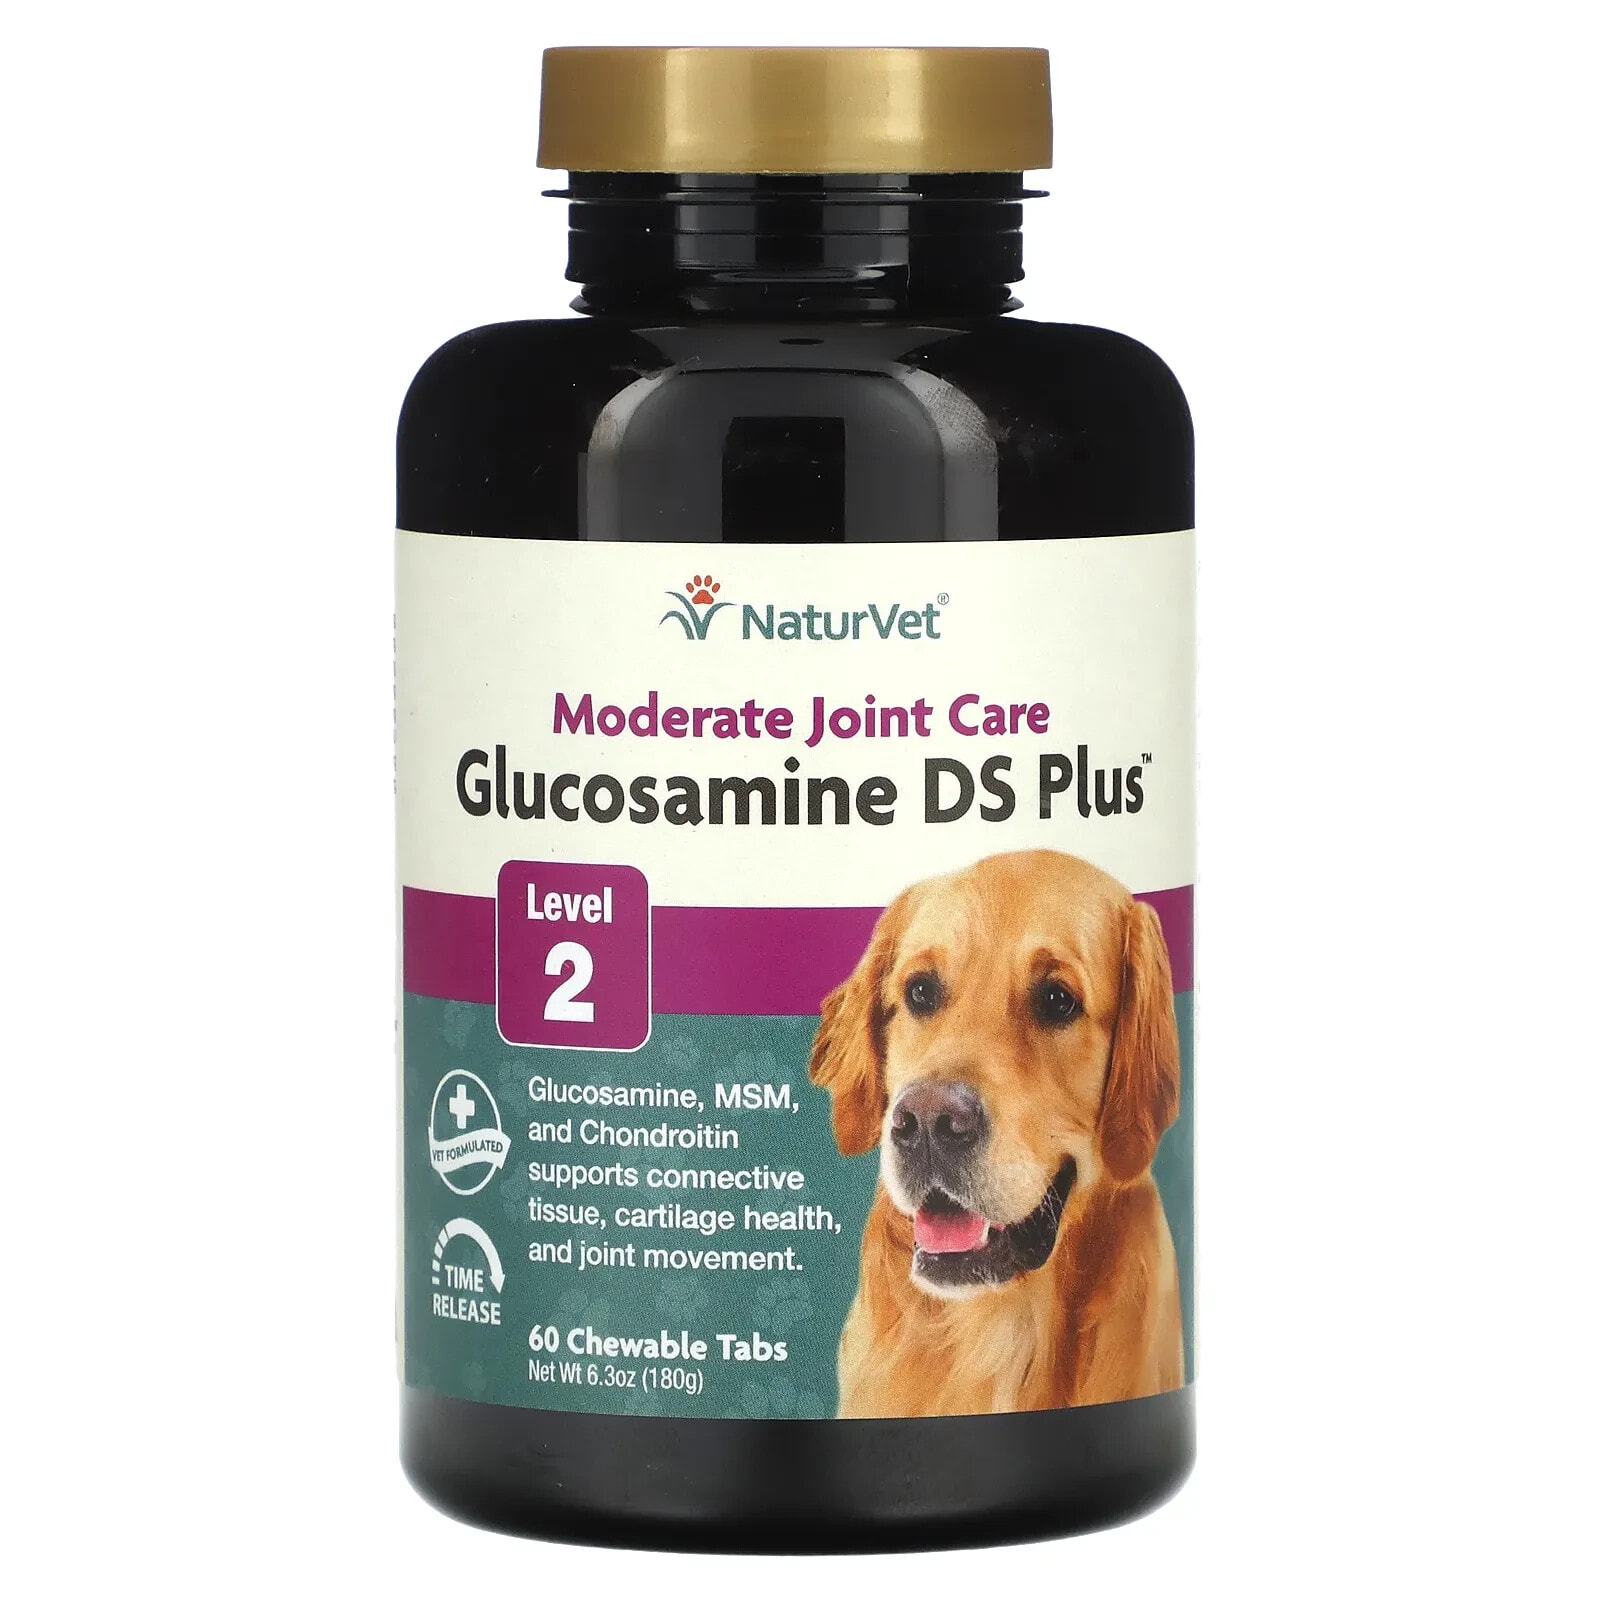 NaturVet, Glucosamine DS Plus, Moderate Joint Care, Level 2, For Dogs & Cats, 60 Chewable Tablets, 6.3 oz (180 g)